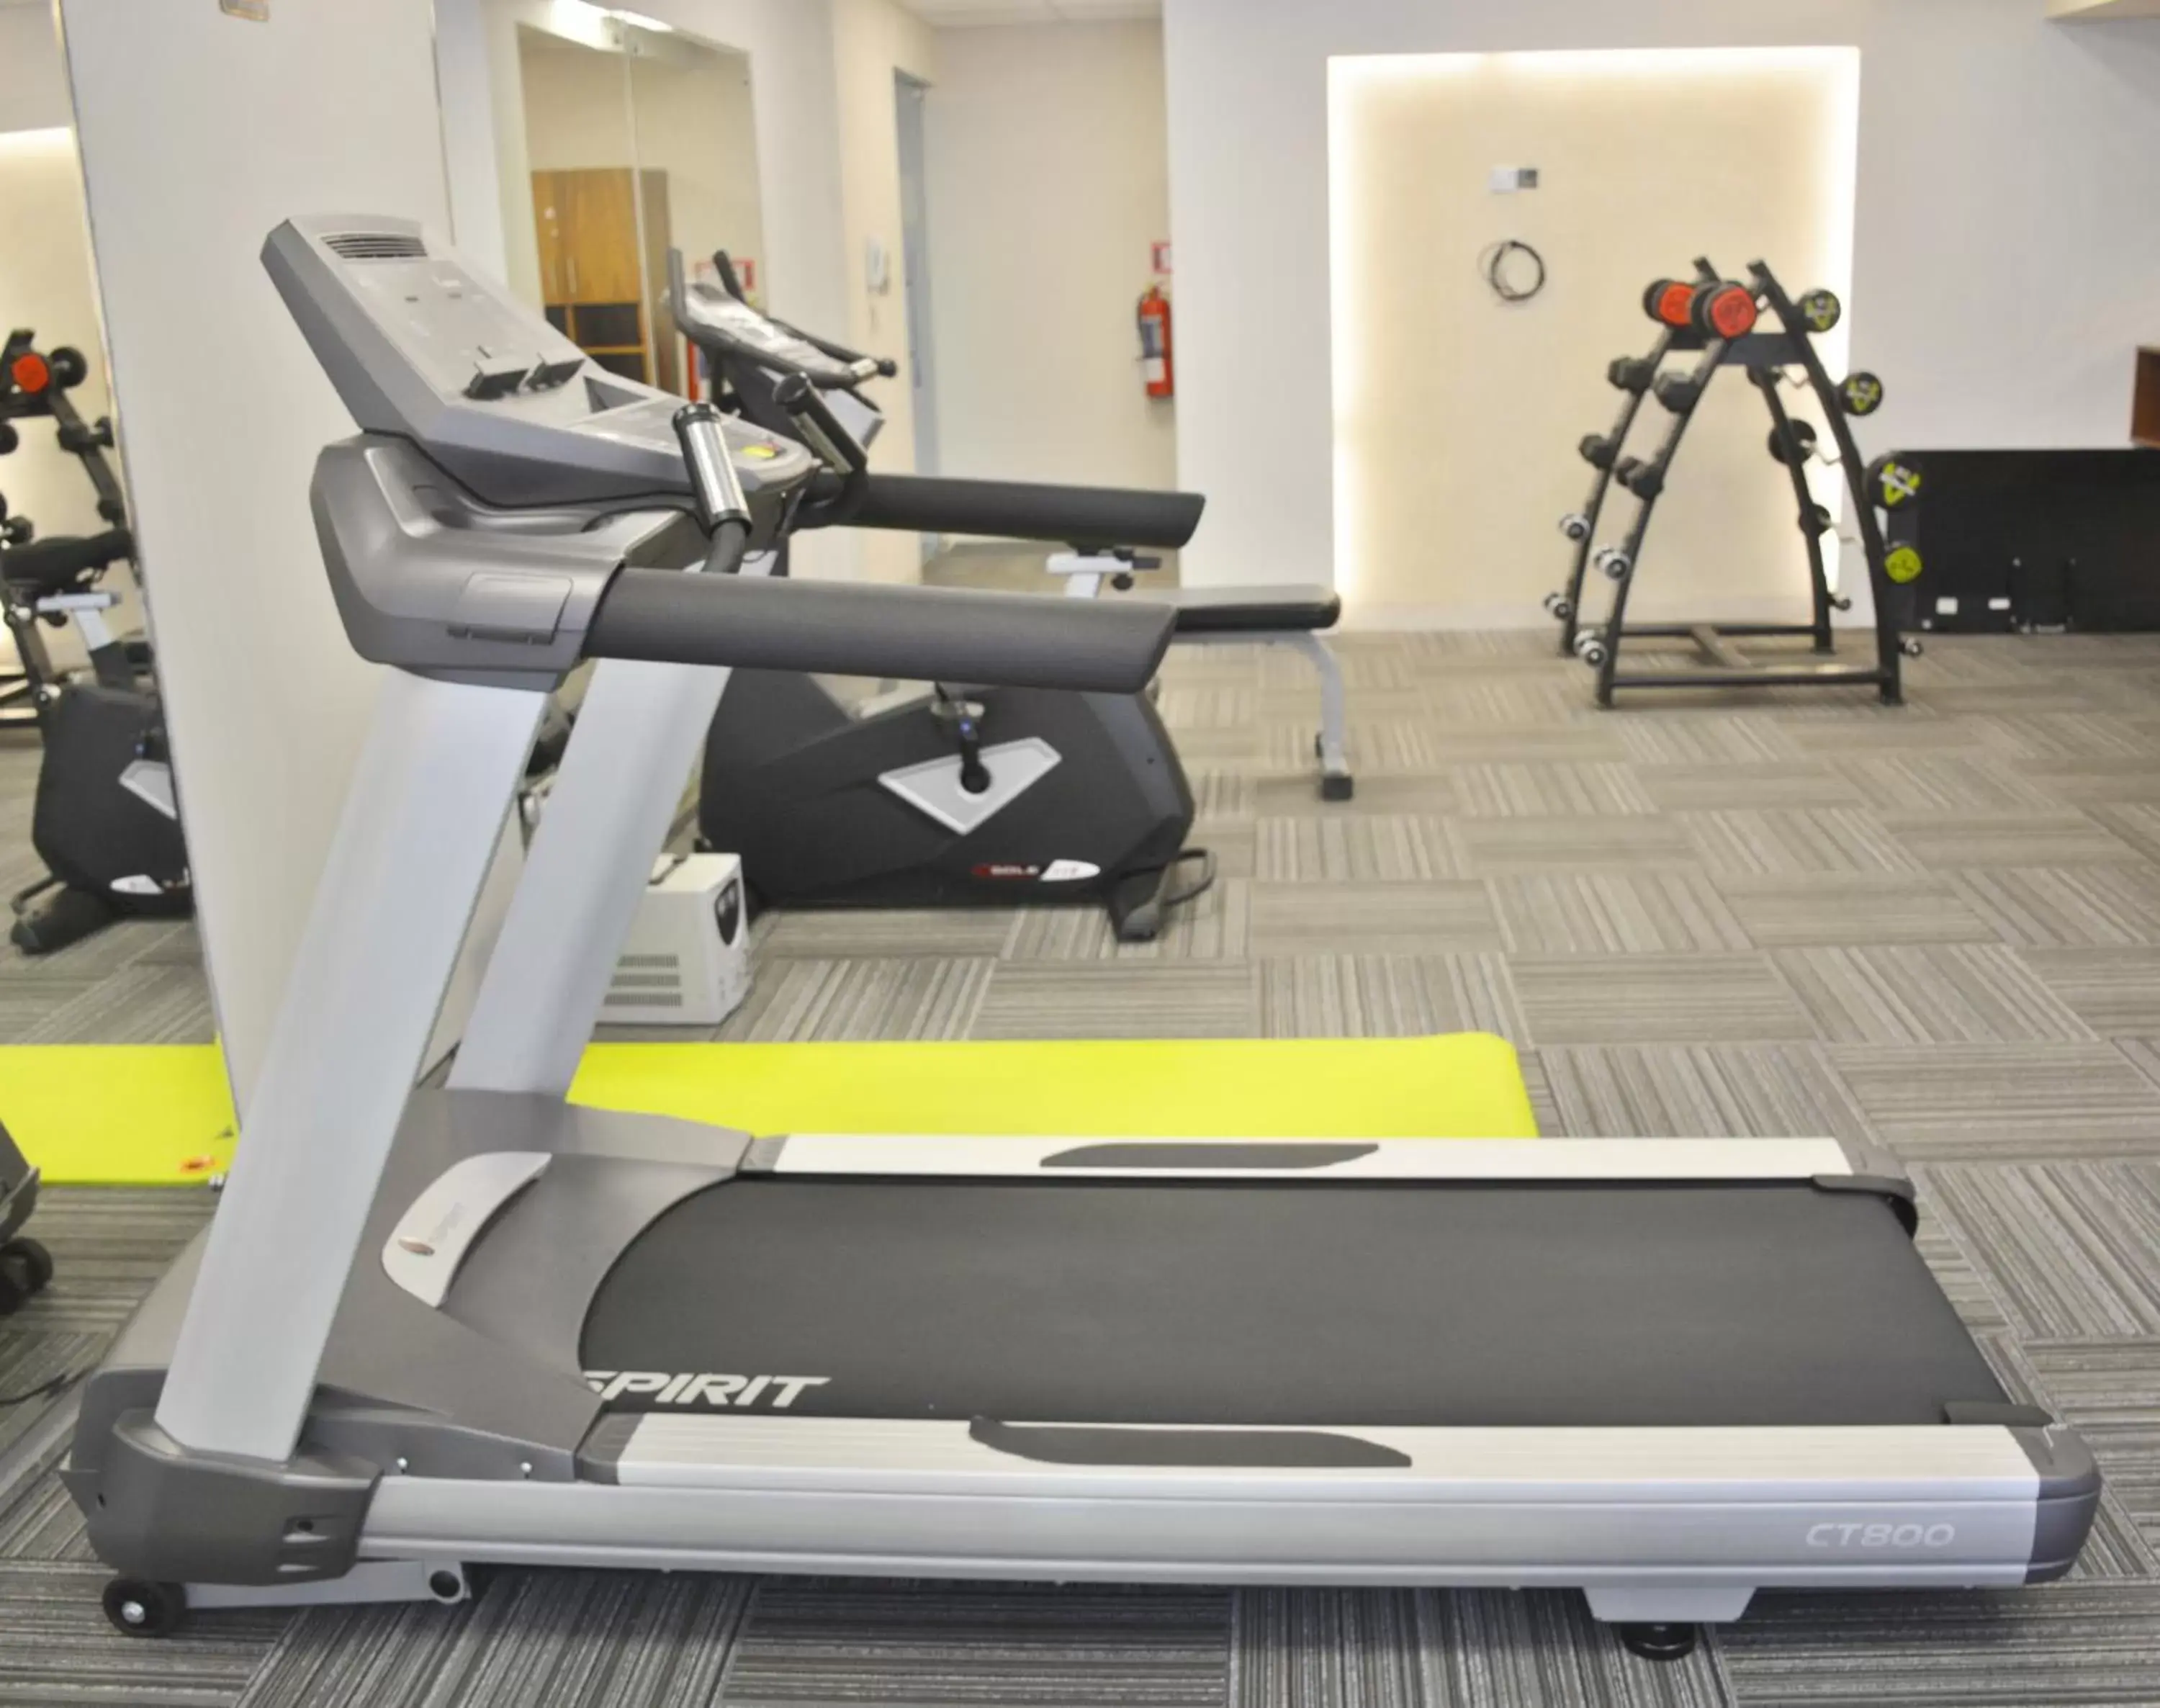 Fitness centre/facilities, Fitness Center/Facilities in Asia Hotel & Resorts